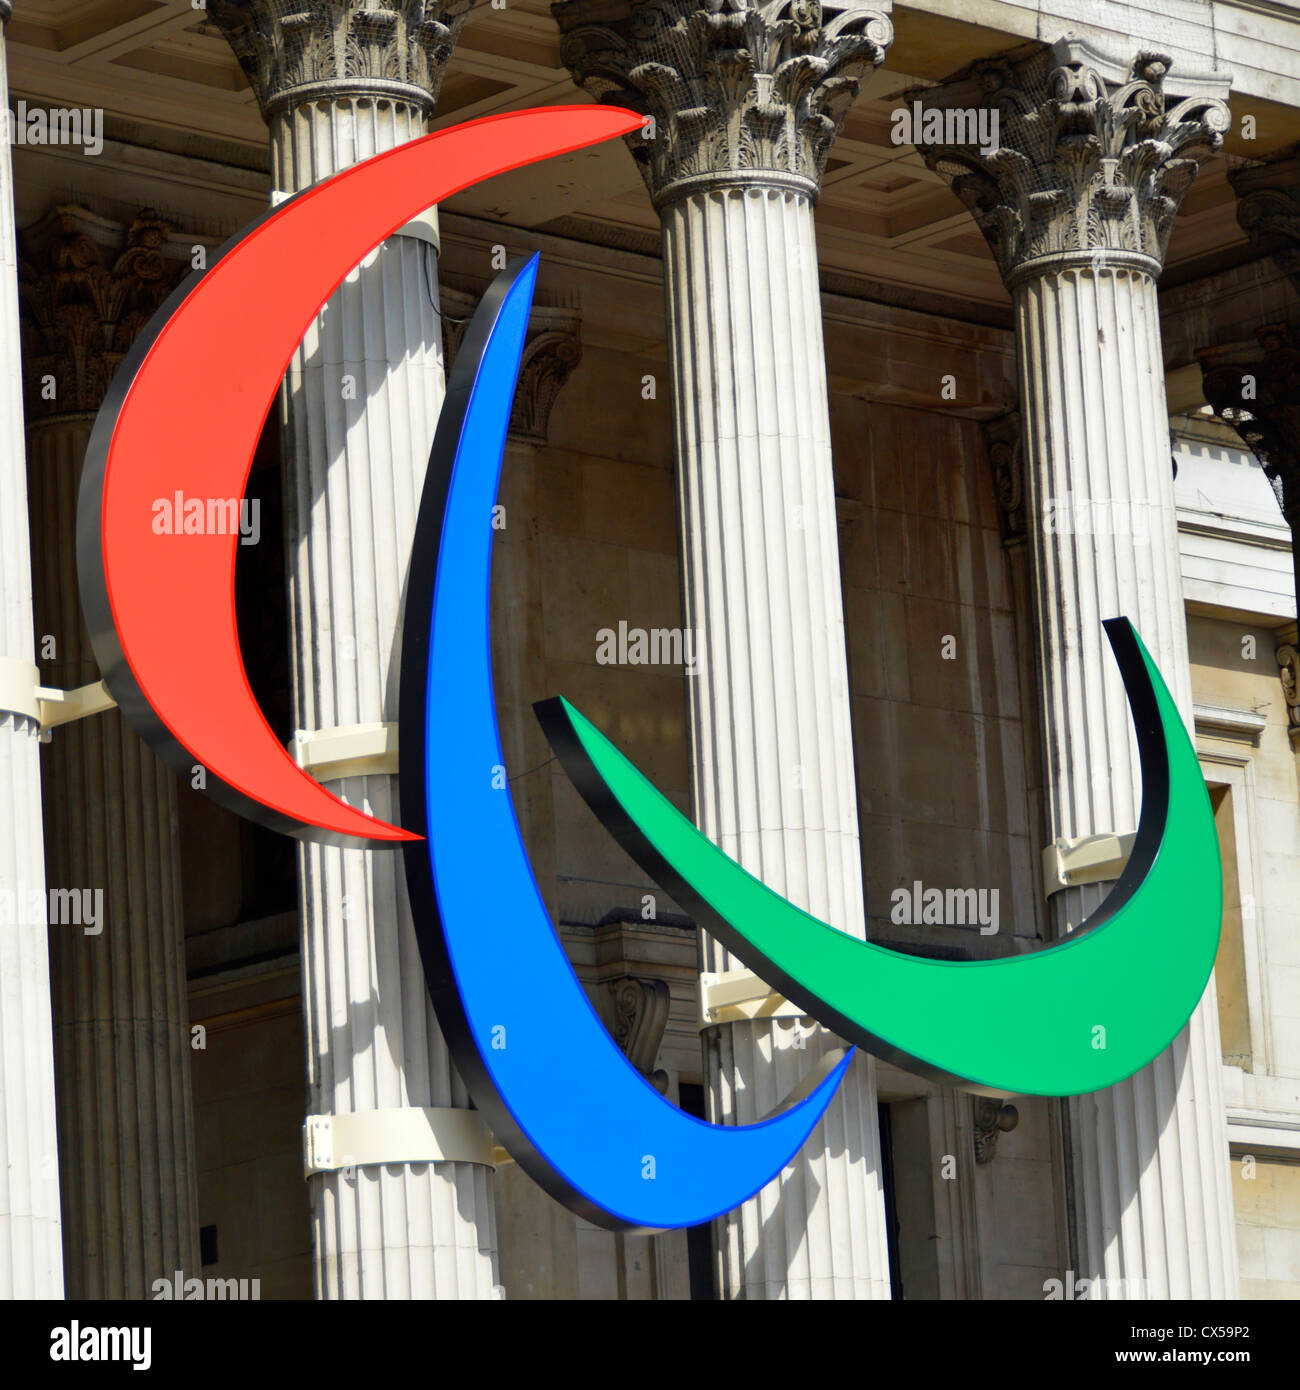 Paralympic symbol of three agitos coloured red blue and green mounted on the columns of the National Gallery in Trafalgar Square London England UK Stock Photo